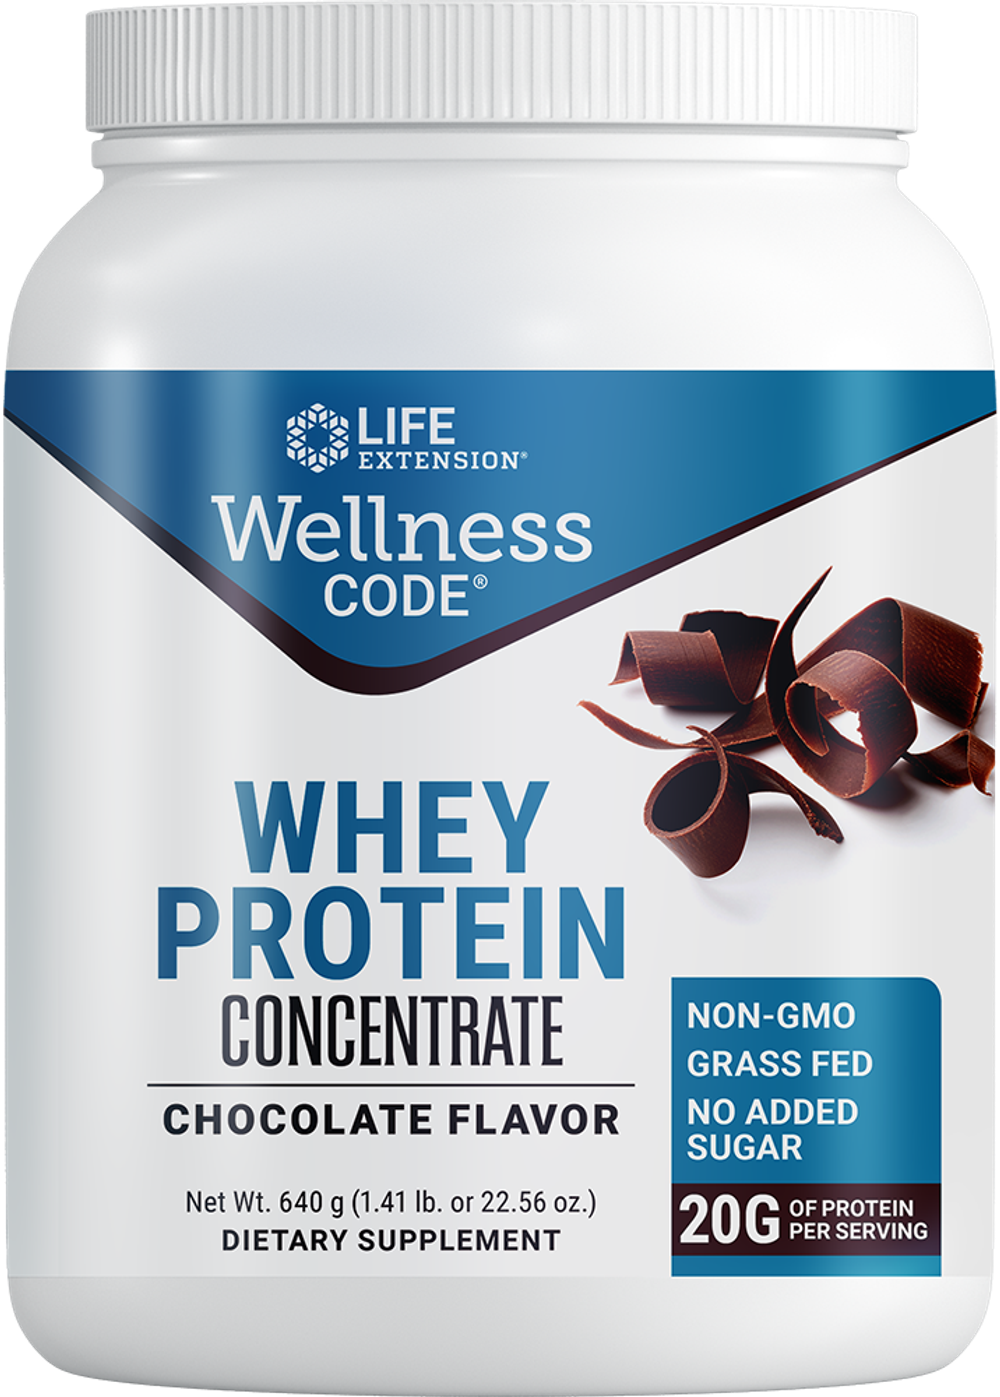 Wellness Code® Whey Protein Concentrate Life Extension